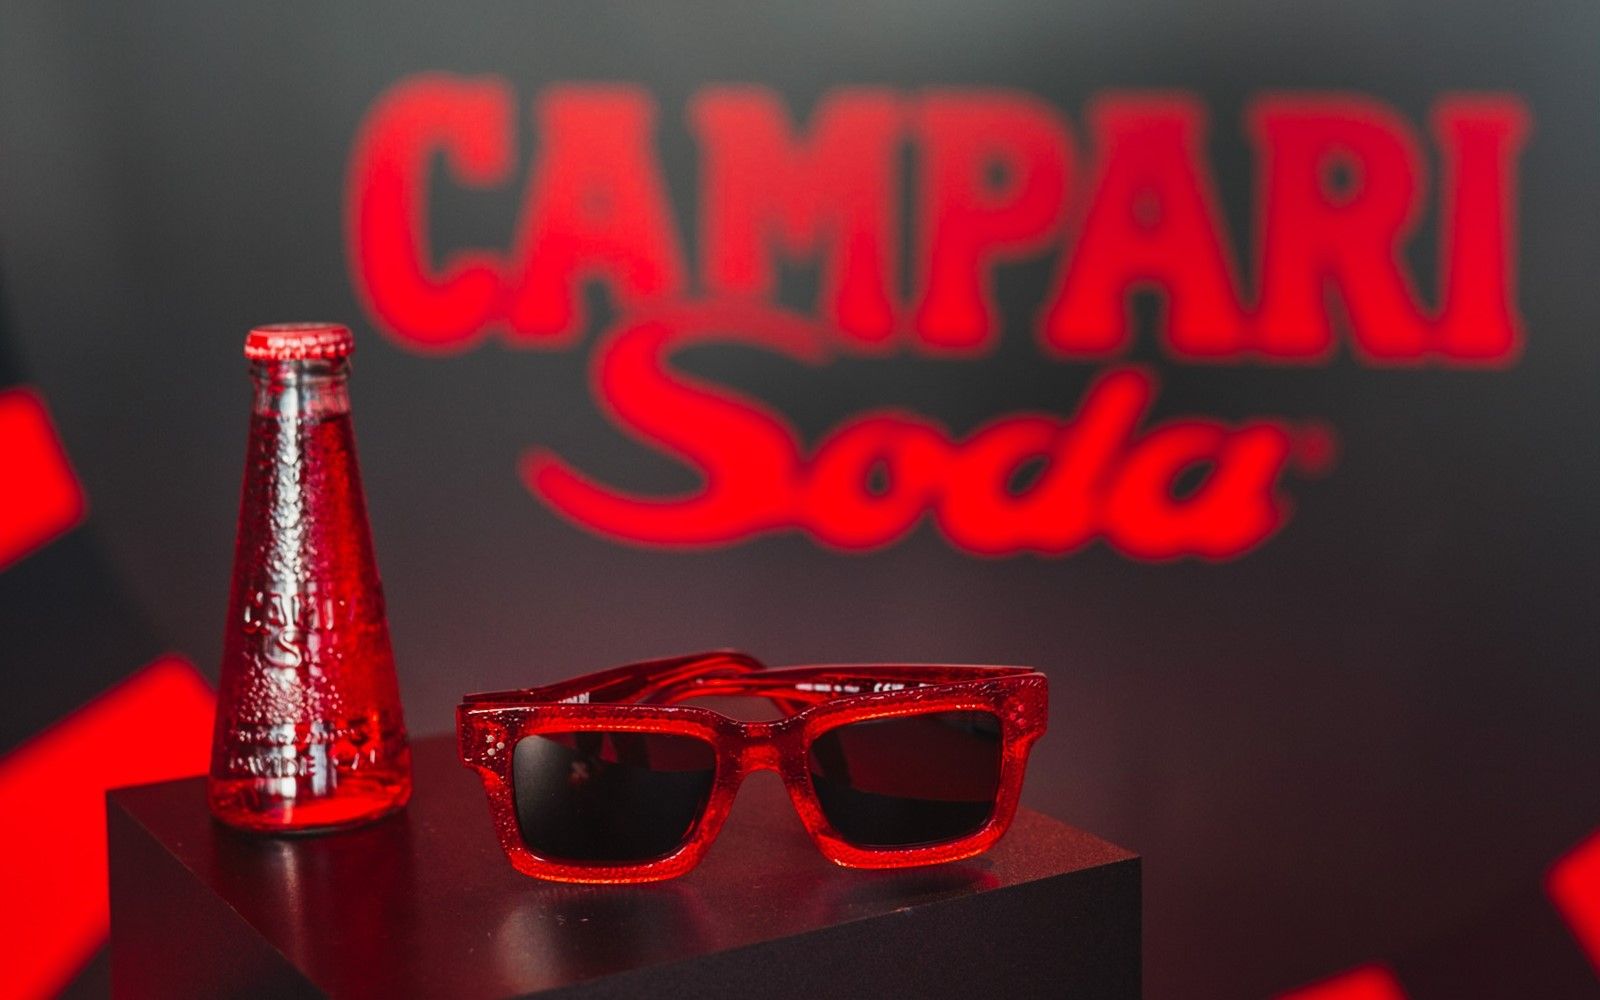 Campari Soda and Ottomila present their first eyewear collection